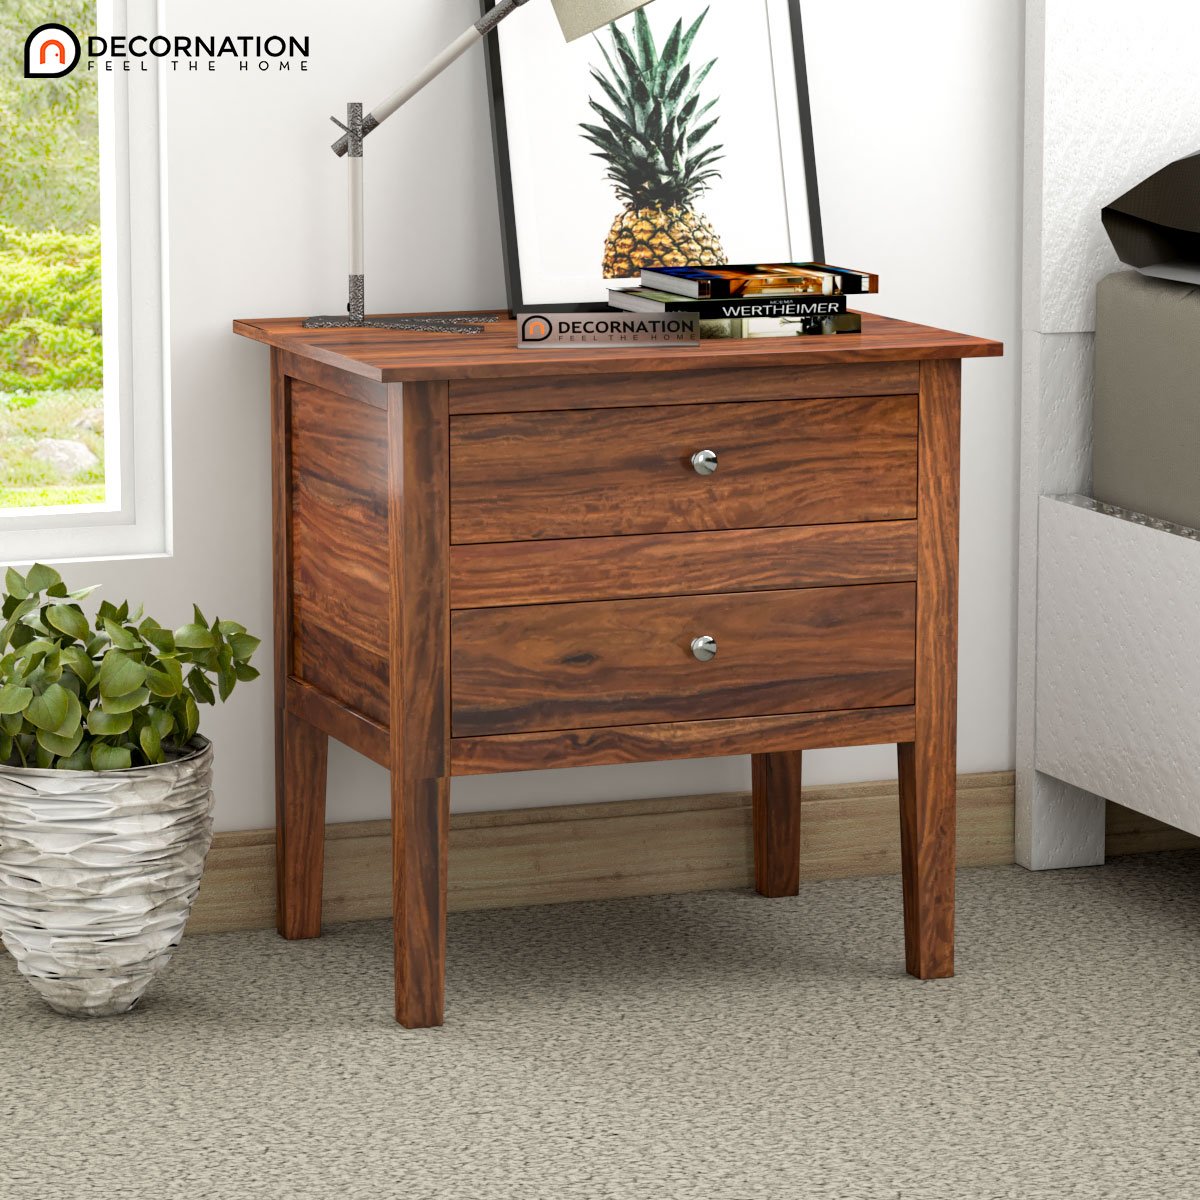 Hera Wooden Storage Bedroom Side Table – Natural Finish